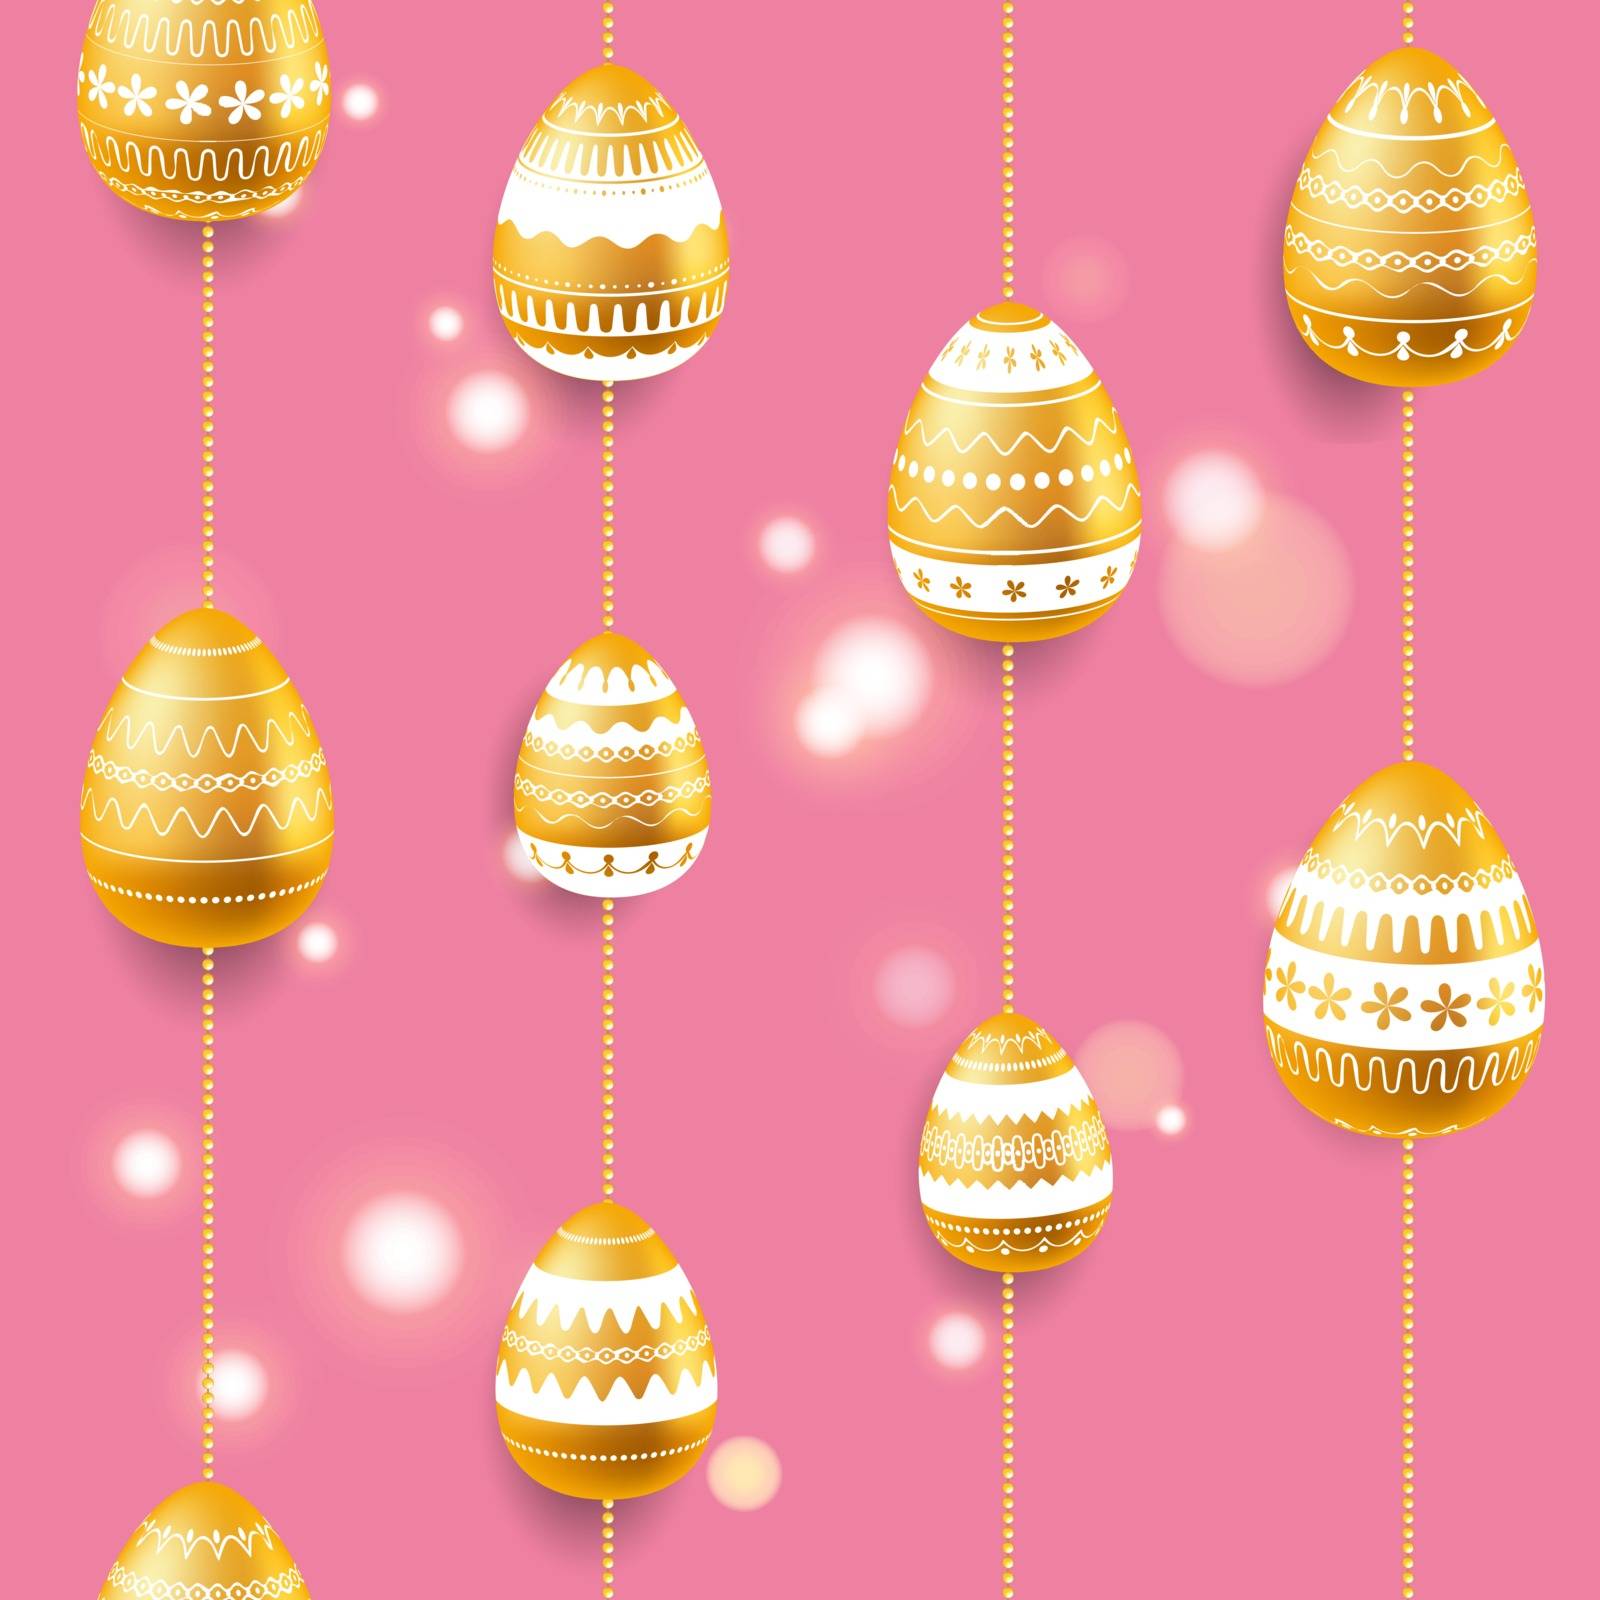 Easter egg. Pattern with realistic Easter eggs. Seamless texture vector illustration with glow effect. Religious holiday background decoration. Golden eggs with white ornaments on pink background. by LittleCuckoo